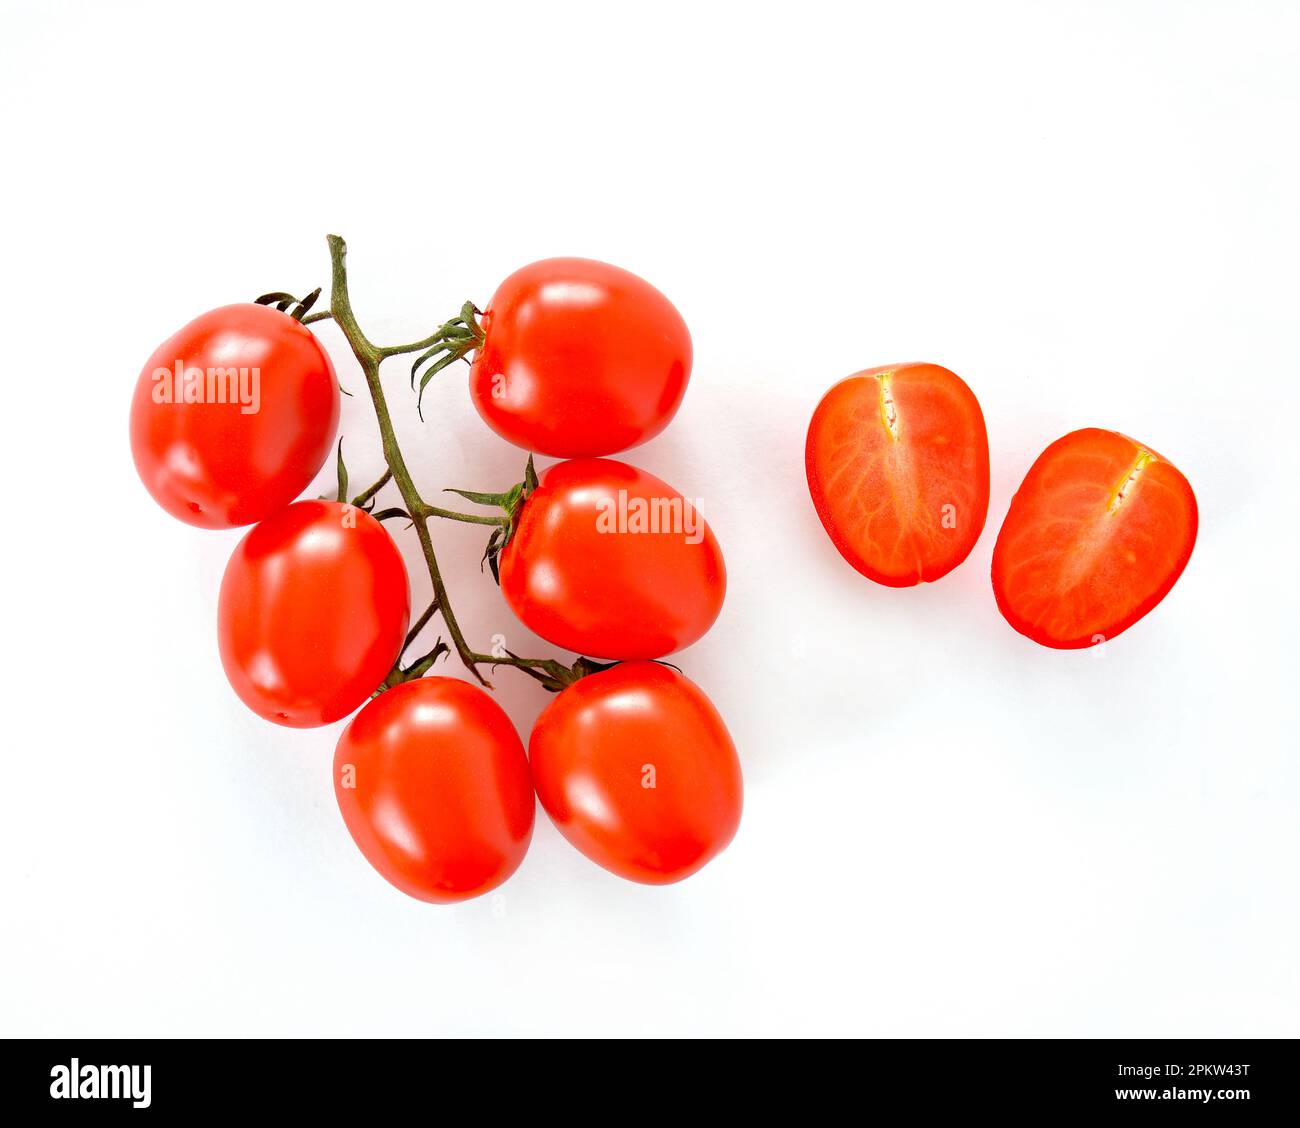 Duet Baby Romanella tomatoes are small egg-shaped multi colored tomatoes in flat lay composition on white background.  Horizontal format with room for Stock Photo